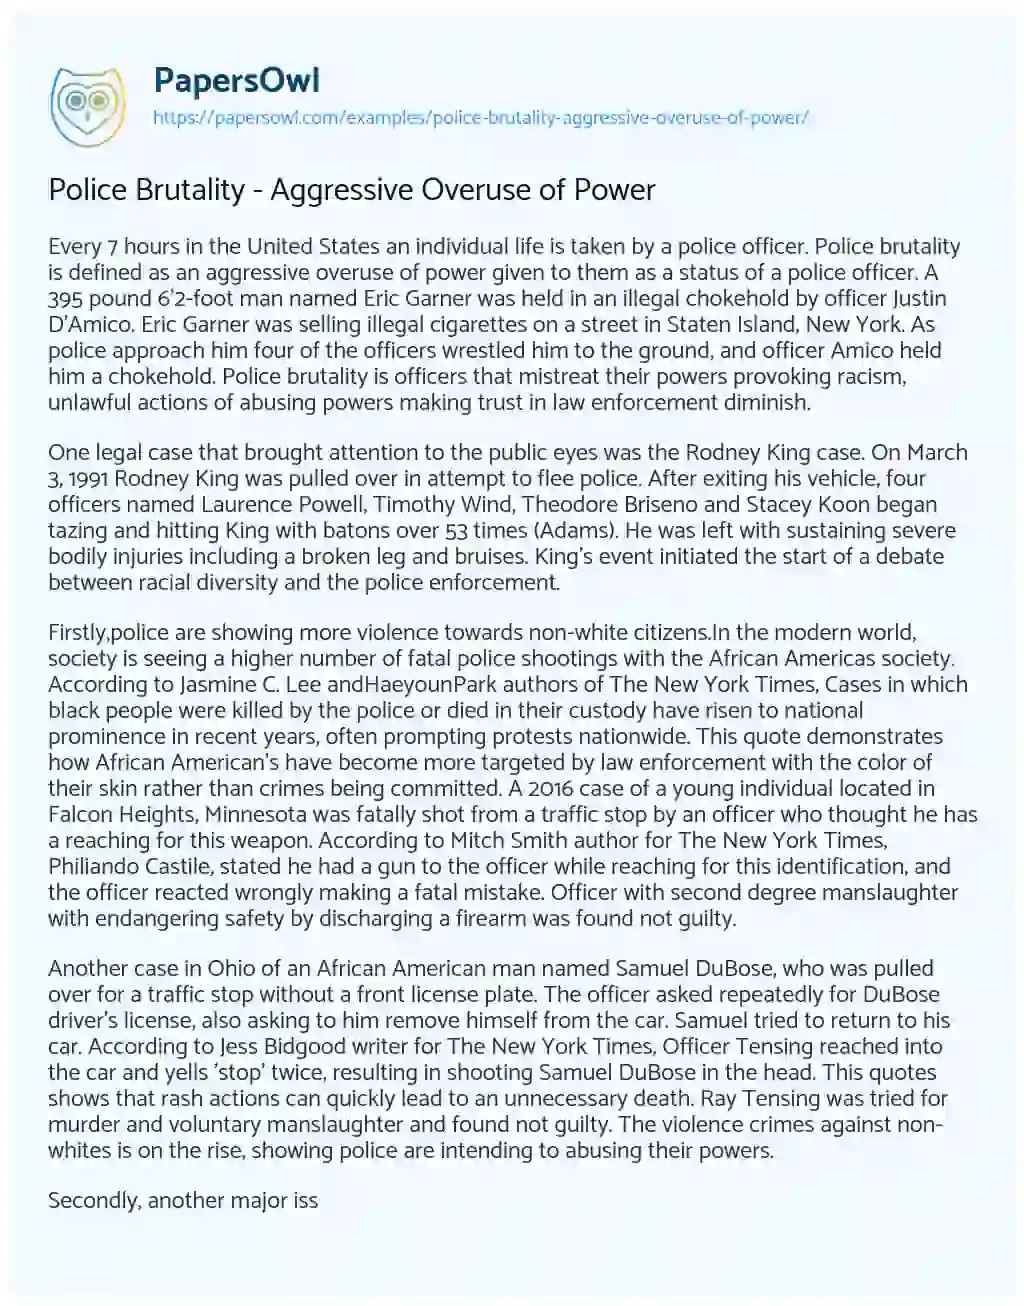 Essay on Police Brutality – Aggressive Overuse of Power